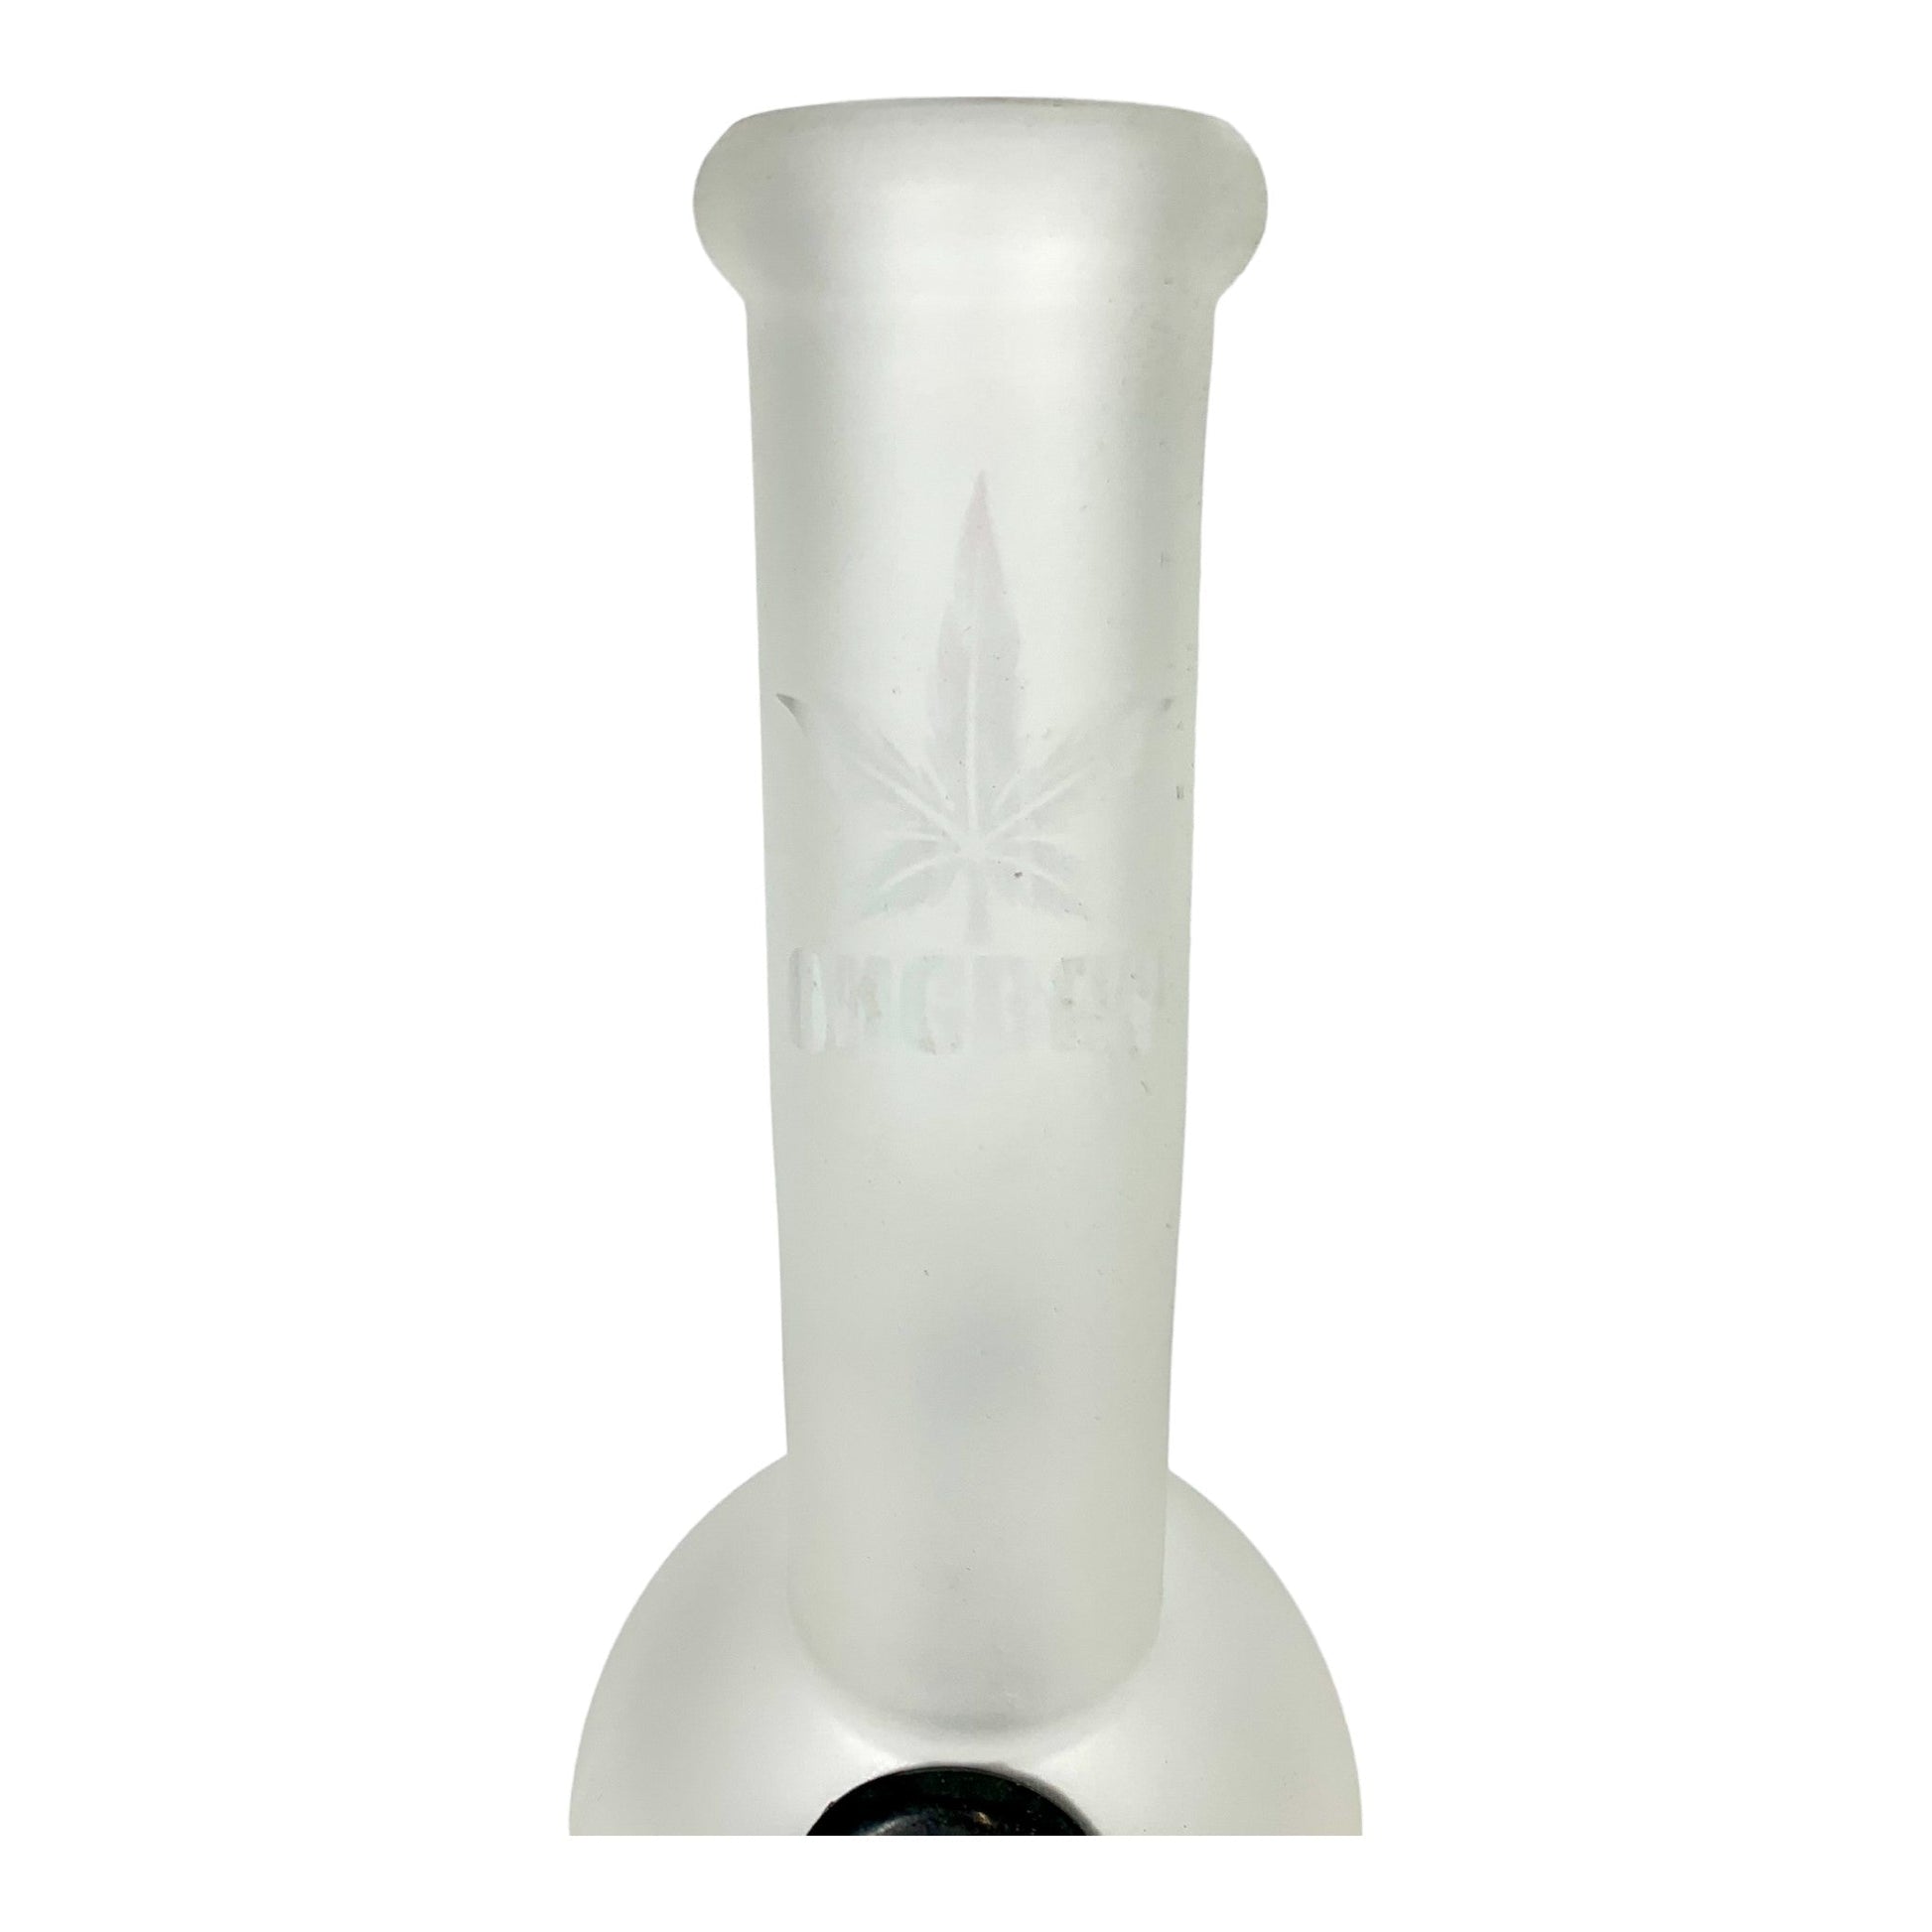 OngBay Frosted Glass Double Chamber Bong 23cm - The Bong Baron